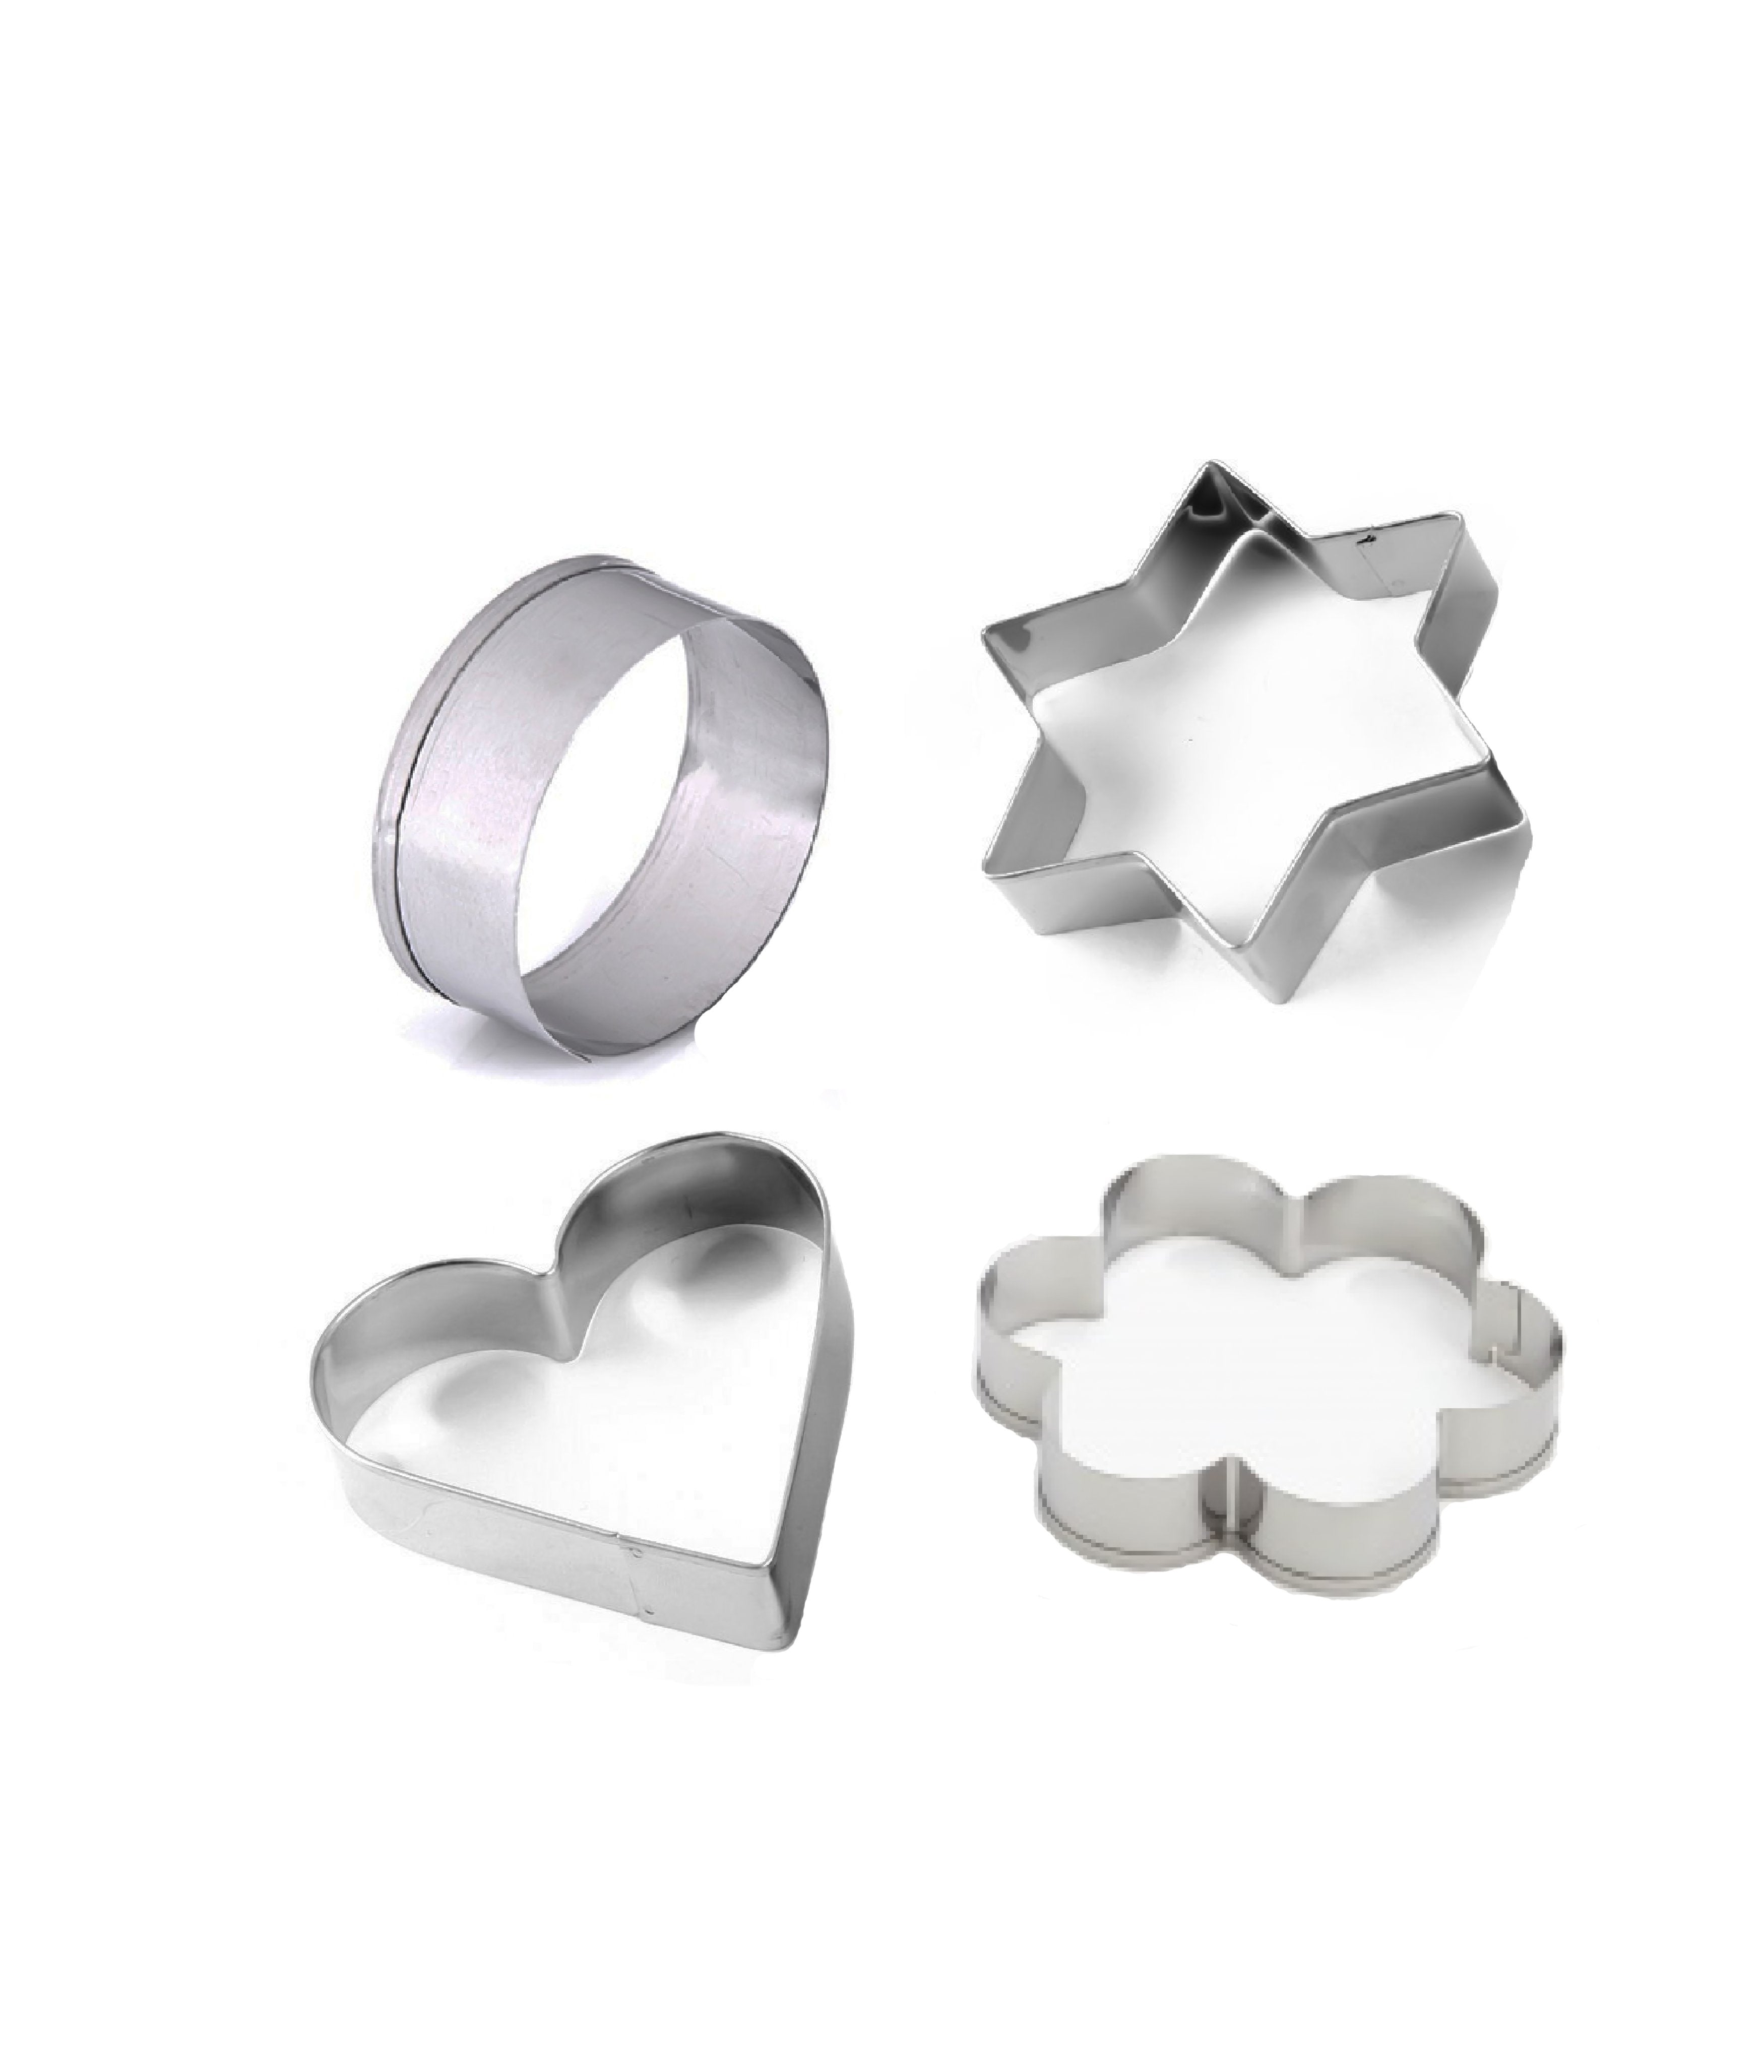 0827 cookie cutter stainless steel cookie cutter with shape heart round star and flower 4 pieces